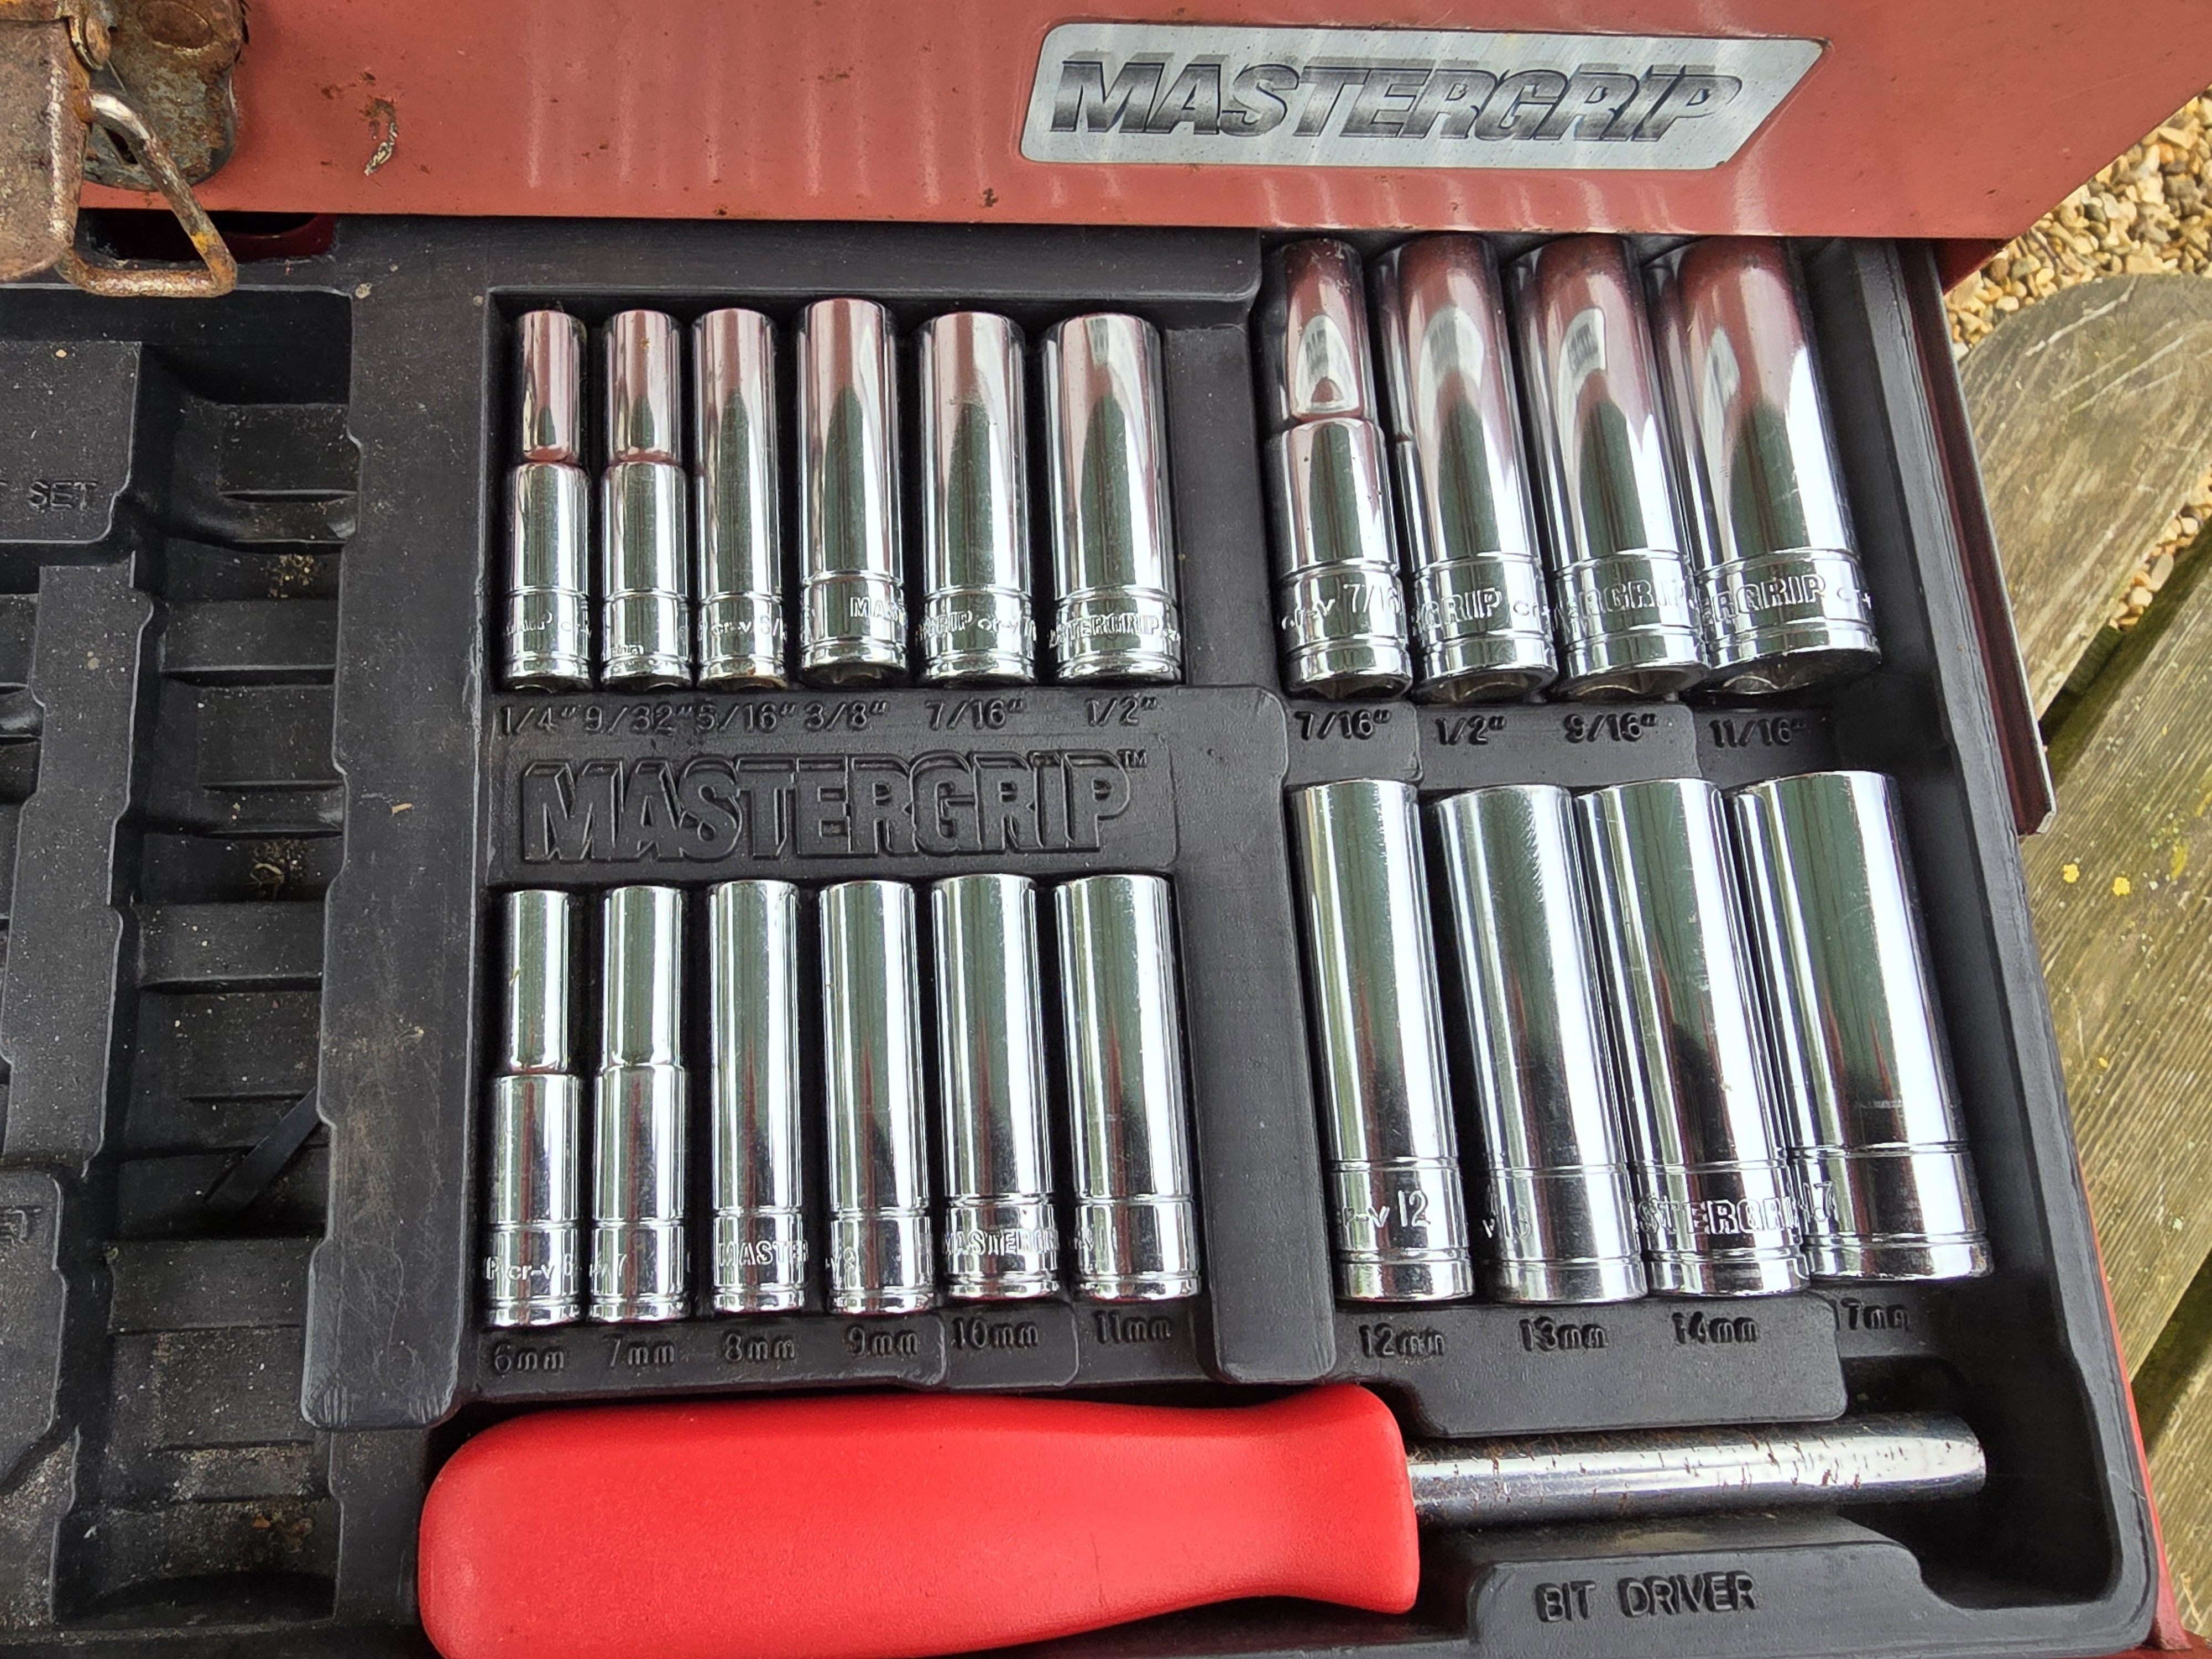 Master Grip Comprehensive Socket set with 1/4" 3/8" 1/2" Ratchets and sockets 1 socket and one - Image 3 of 6